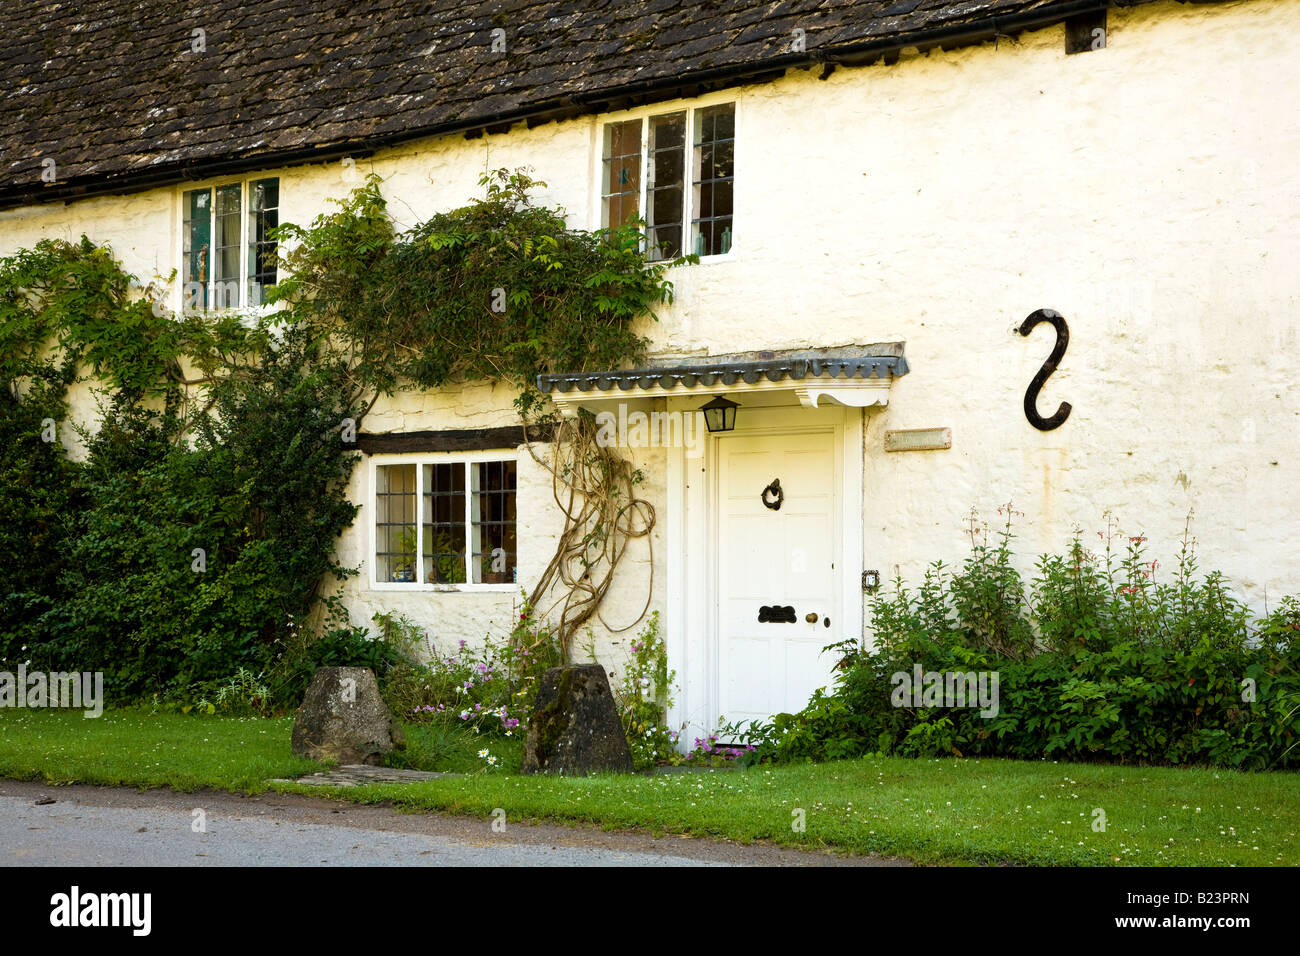 The Long House, a typical English country cottage in the Cotswold village of Ashton Keynes, Wiltshire, England, UK Stock Photo